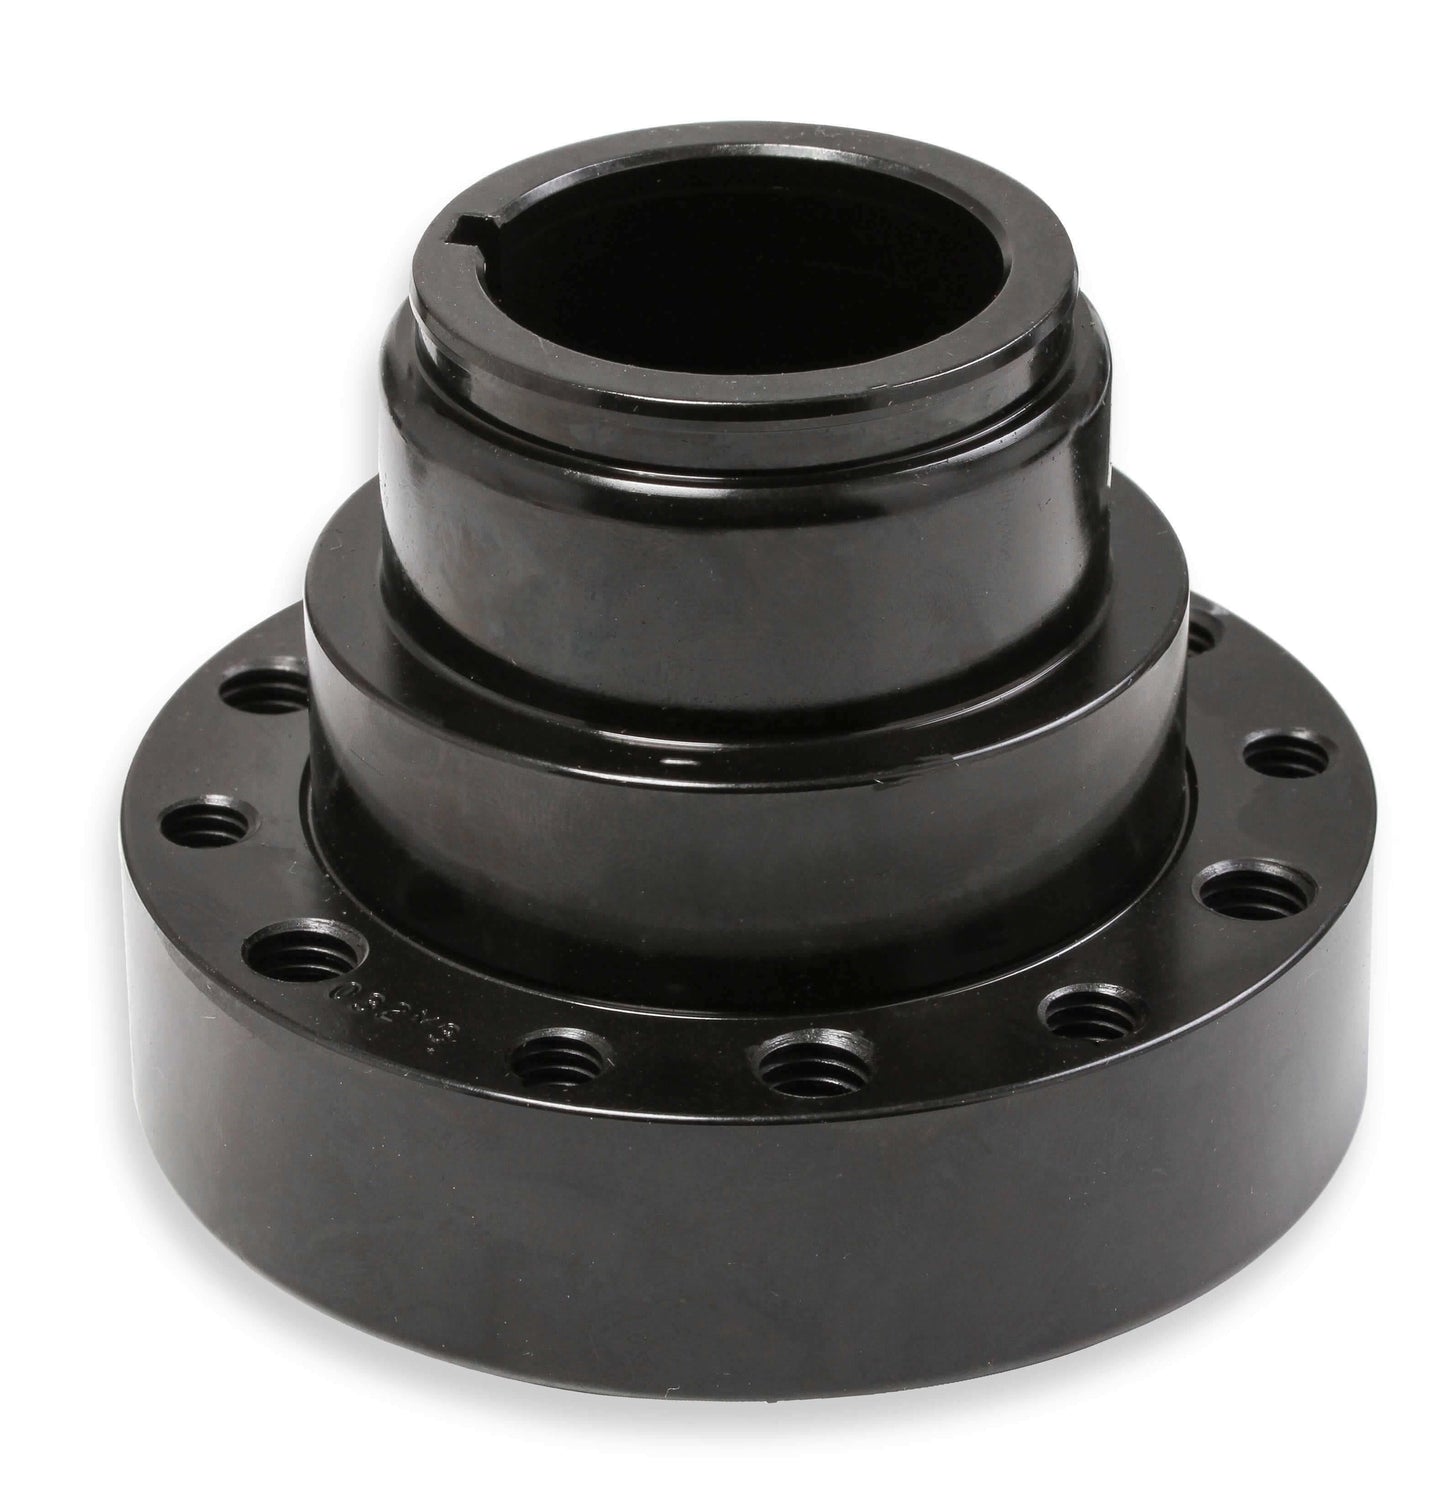 Replacement DAMPER/HUB Assembly - 97-191